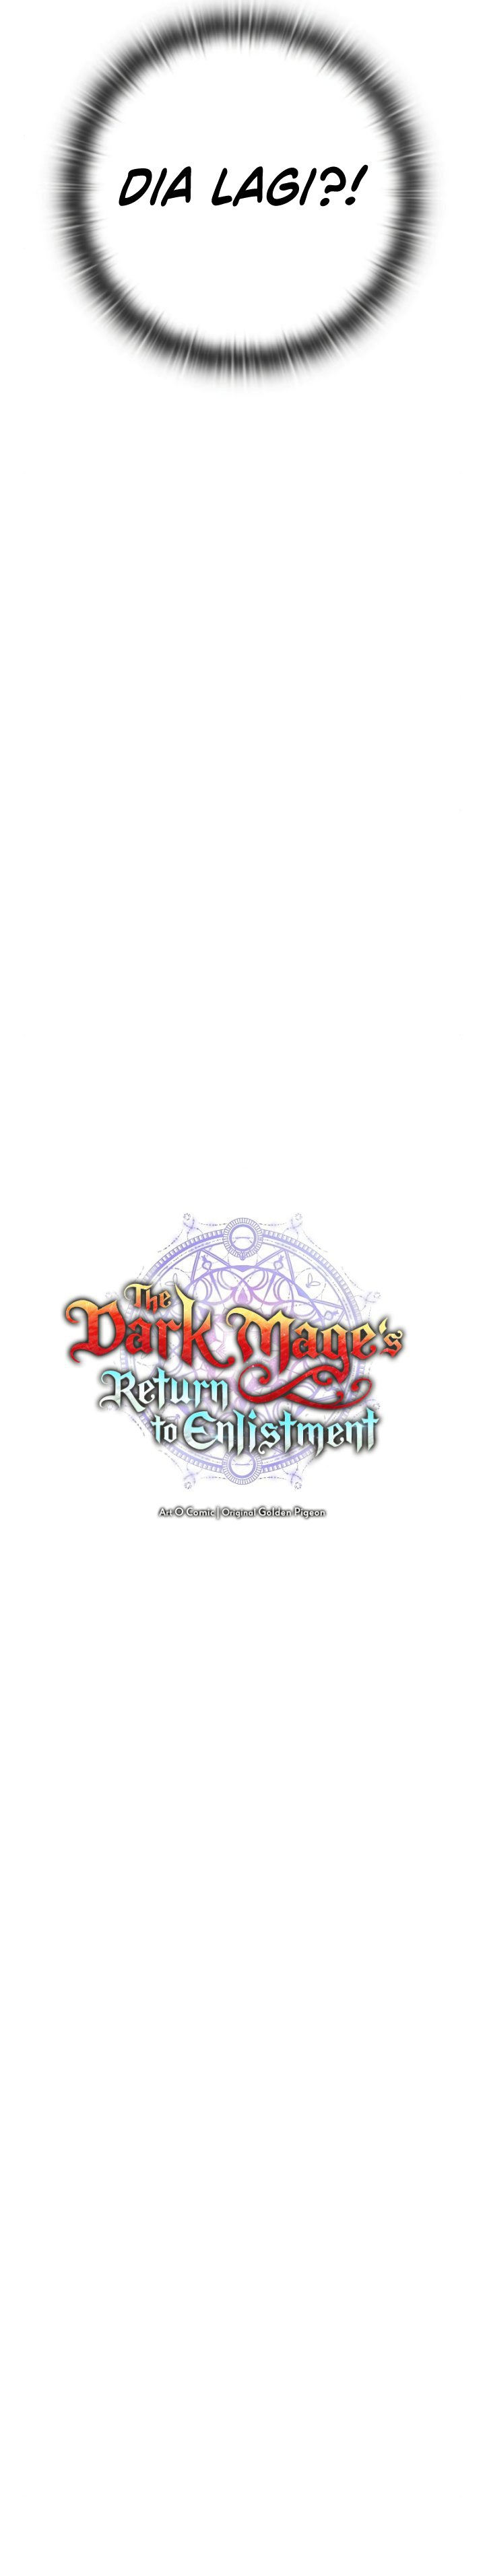 The Dark Mage’s Return To Enlistment Chapter 37